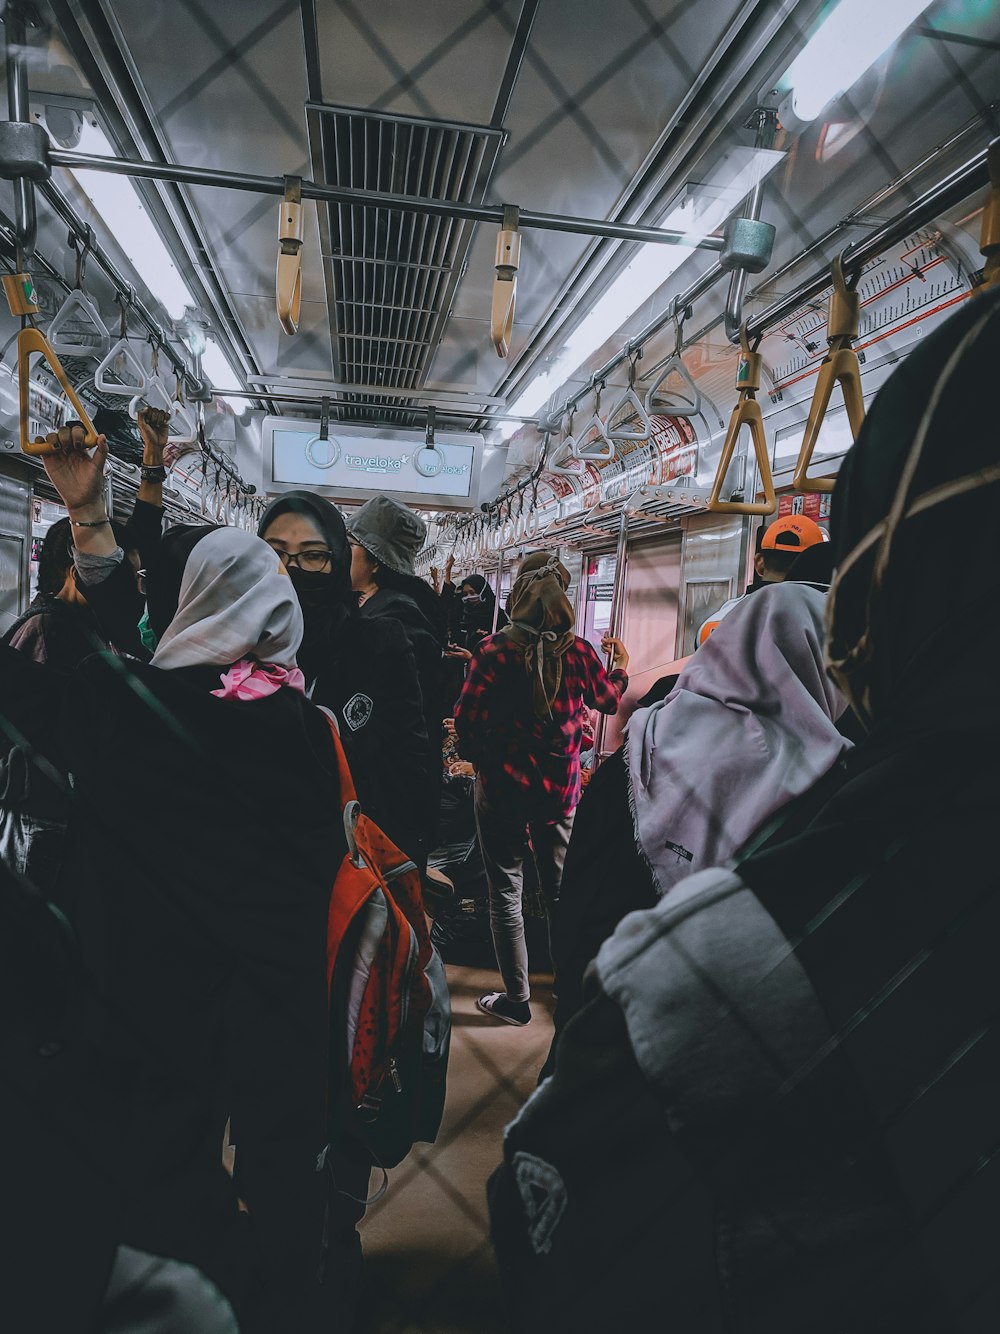 people inside a train with lights